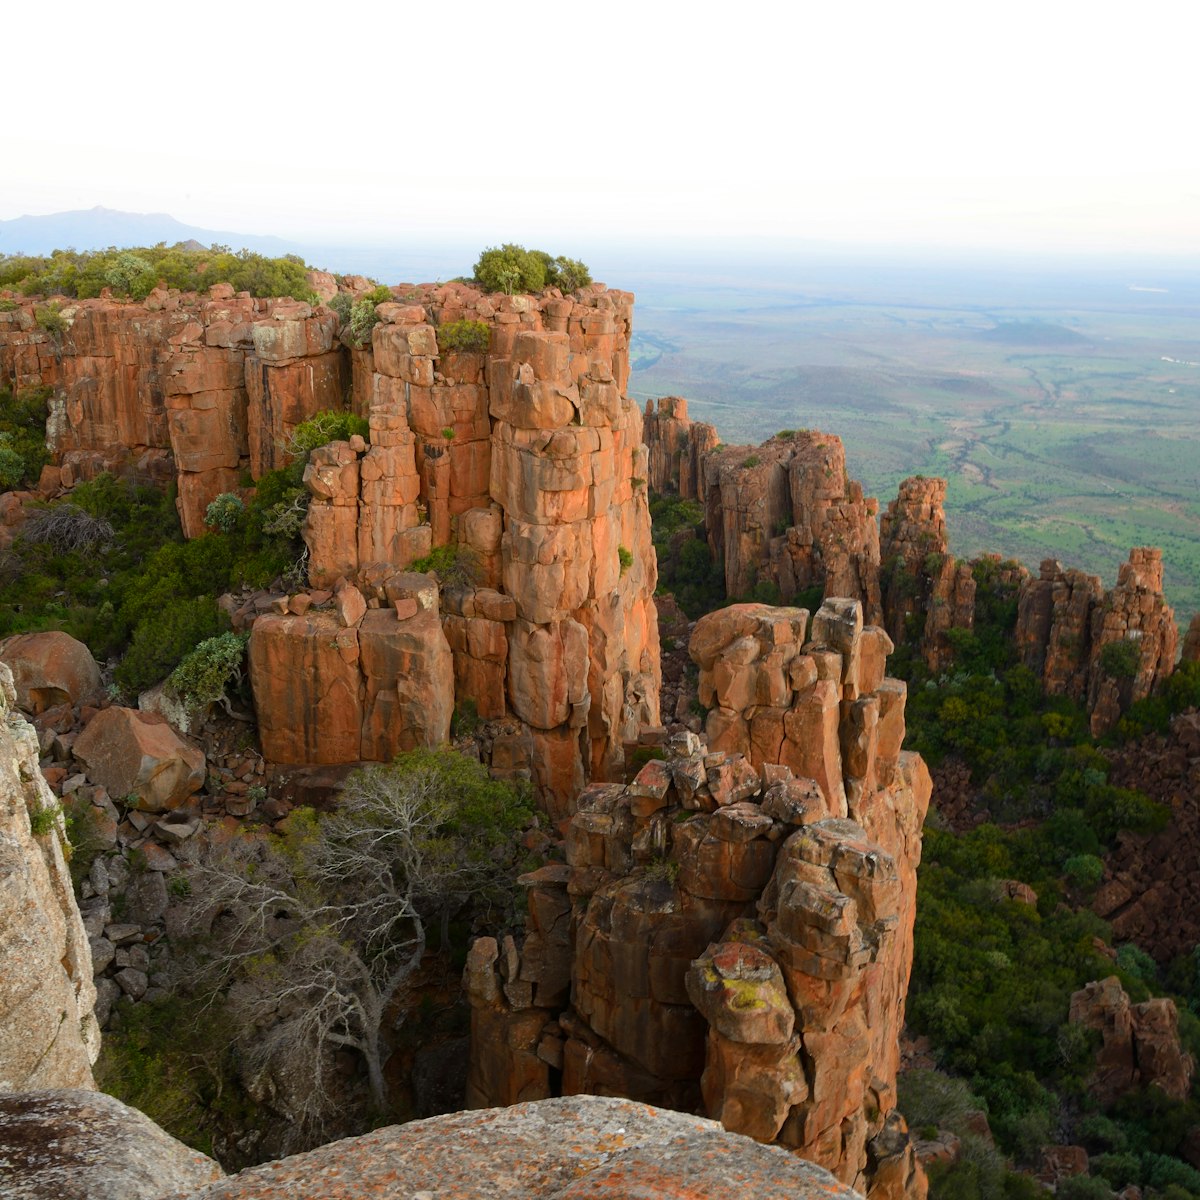 Valley of Desolation, Camdeboo National Park, South Africa.